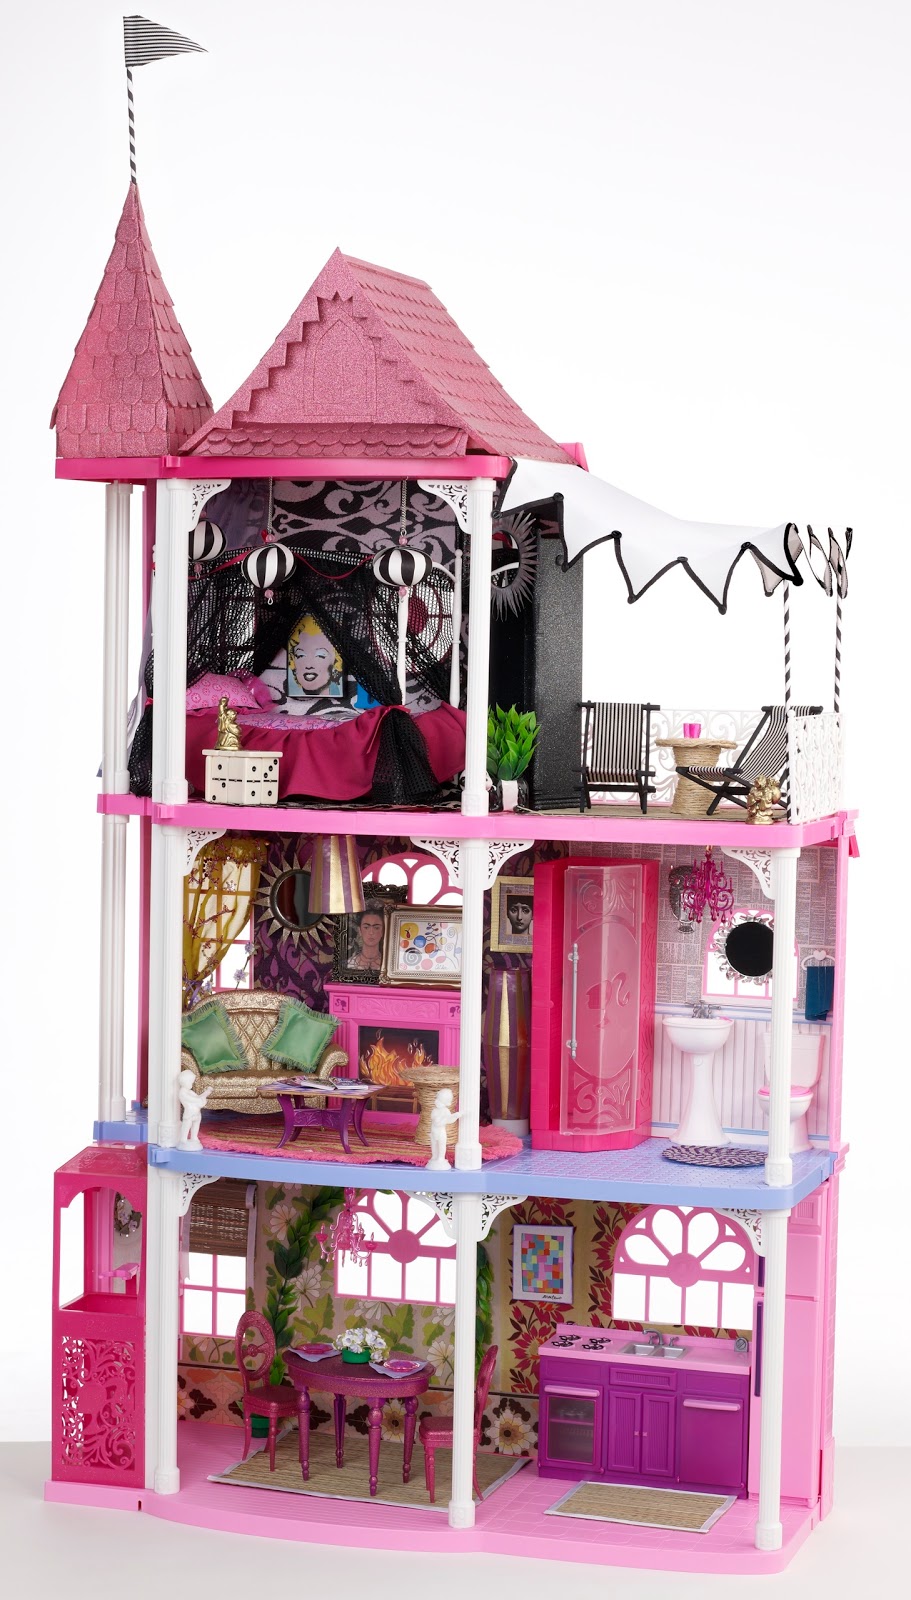 Mark Montano: The Official Mattel Barbie Dream House Photo